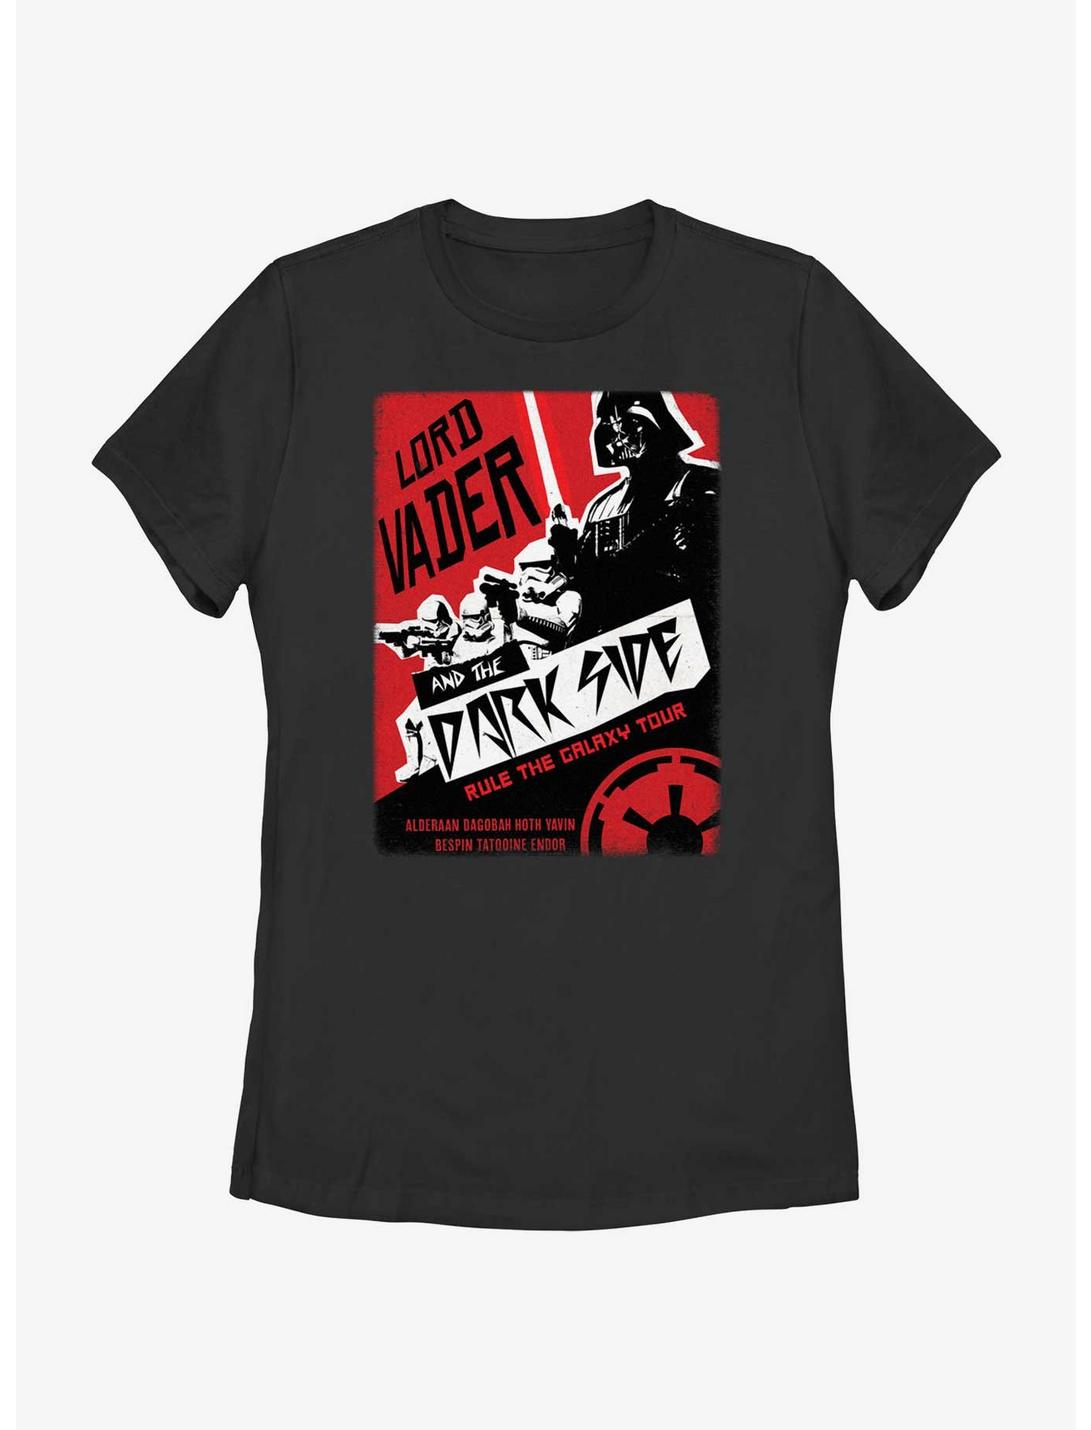 Star Wars Lord Vader And The Dark Side Tour Womens T-Shirt, BLACK, hi-res